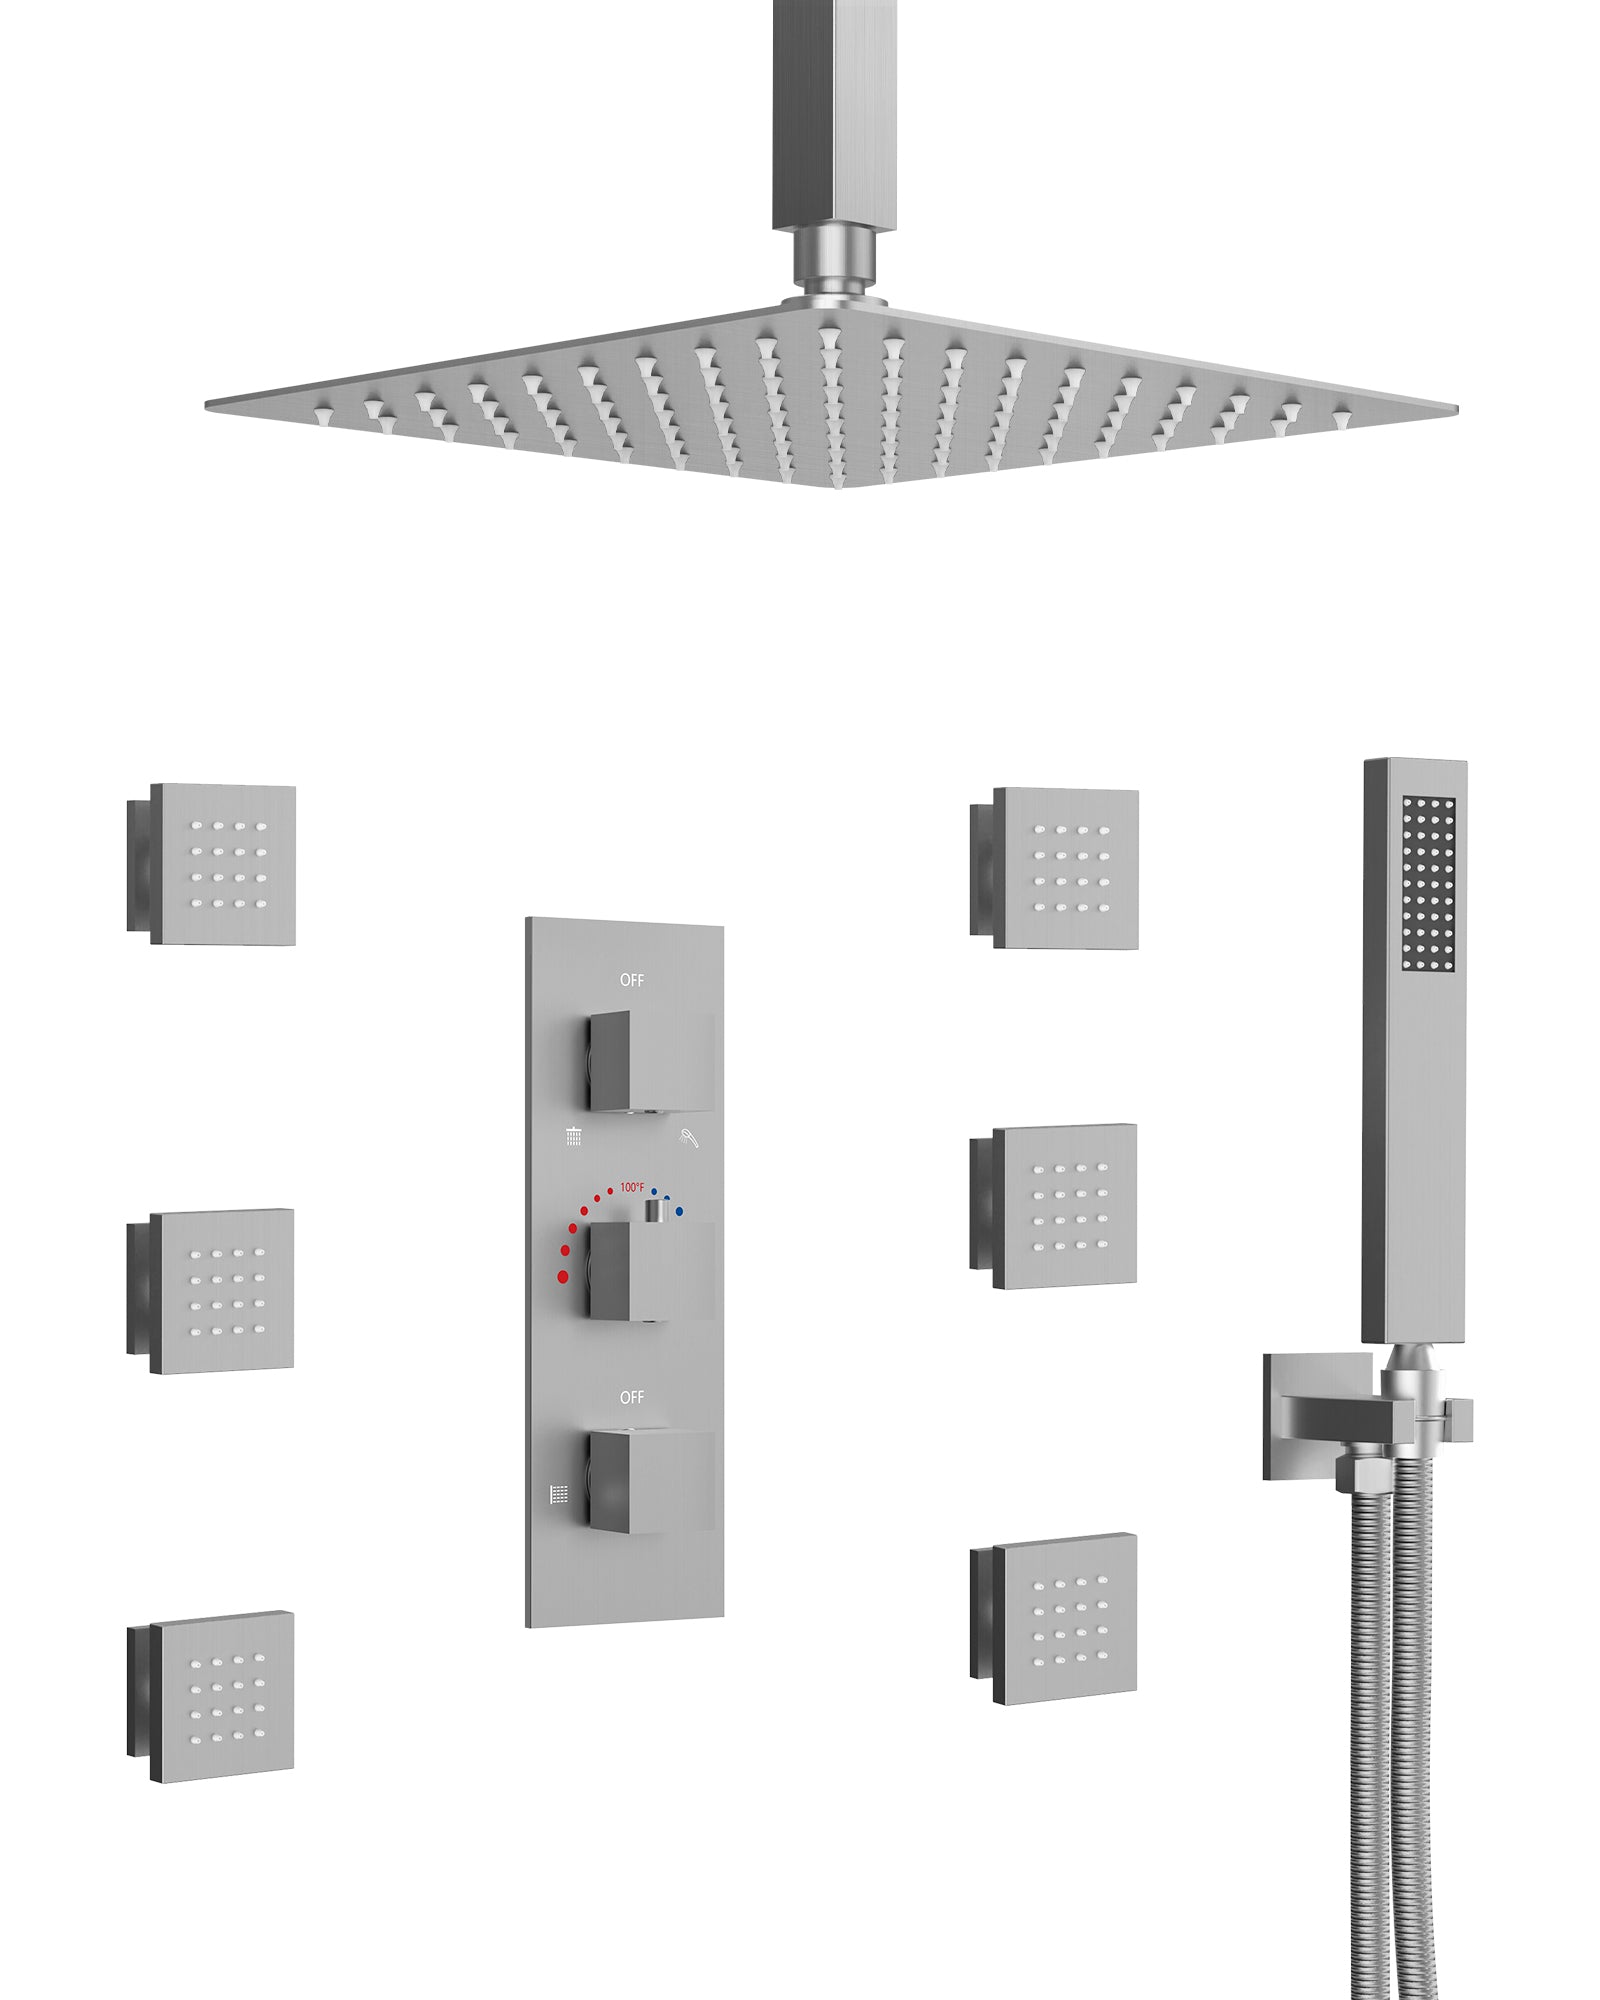 EVERSTEIN Luxury Shower System with Body Massage Jets & 12" Ceiling Rainfall Shower Head Set, Brushed Nickel Shower Fixtures